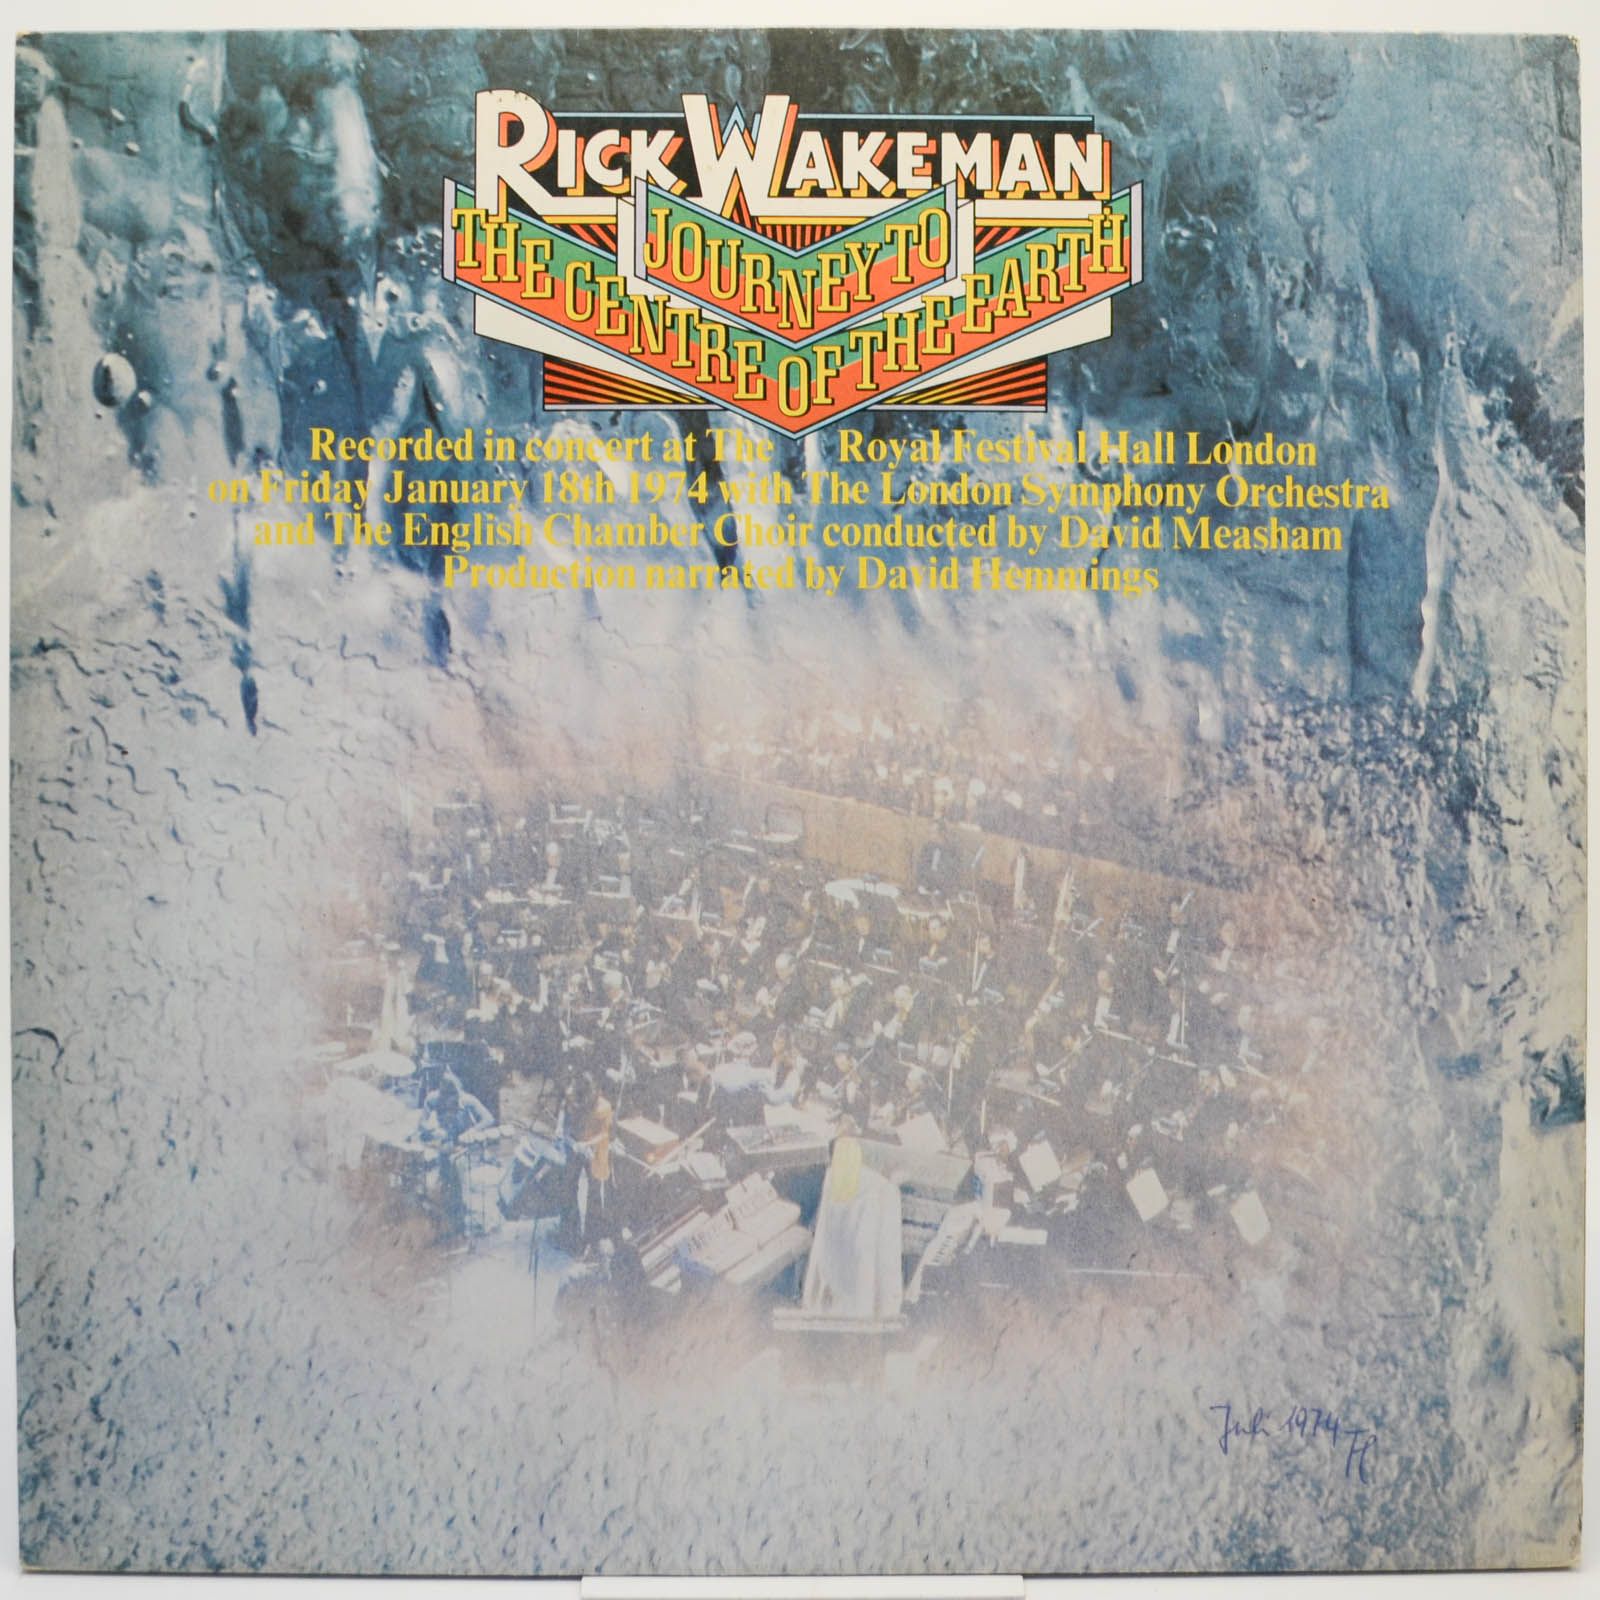 Rick Wakeman With The London Symphony Orchestra And The English Chamber Choir — Journey To The Centre Of The Earth, 1974